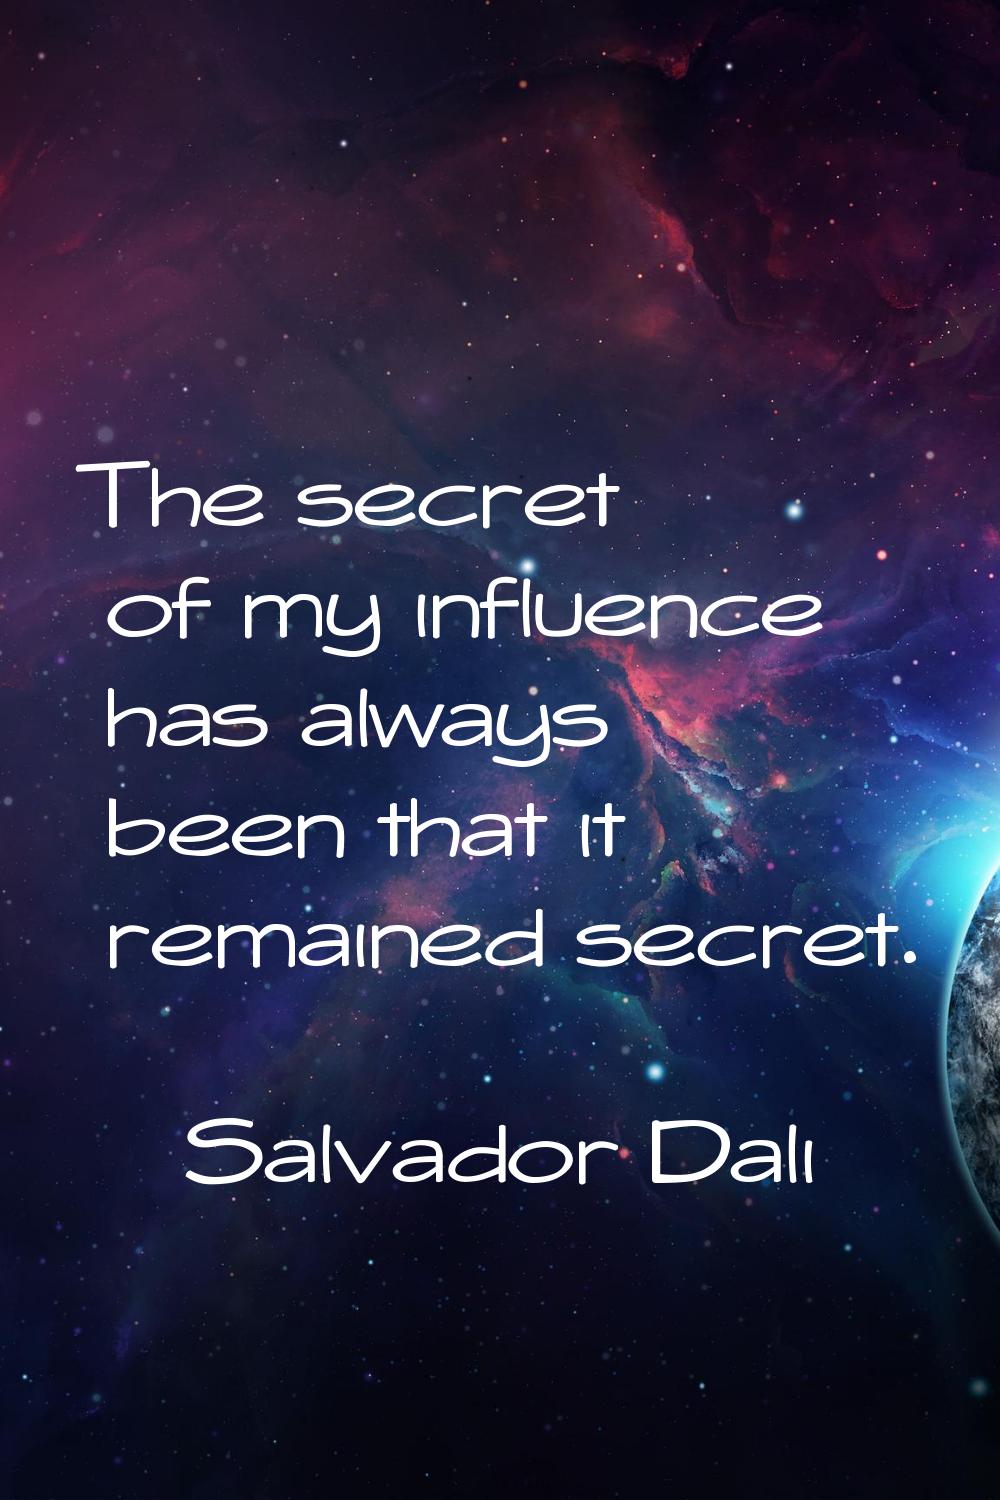 The secret of my influence has always been that it remained secret.